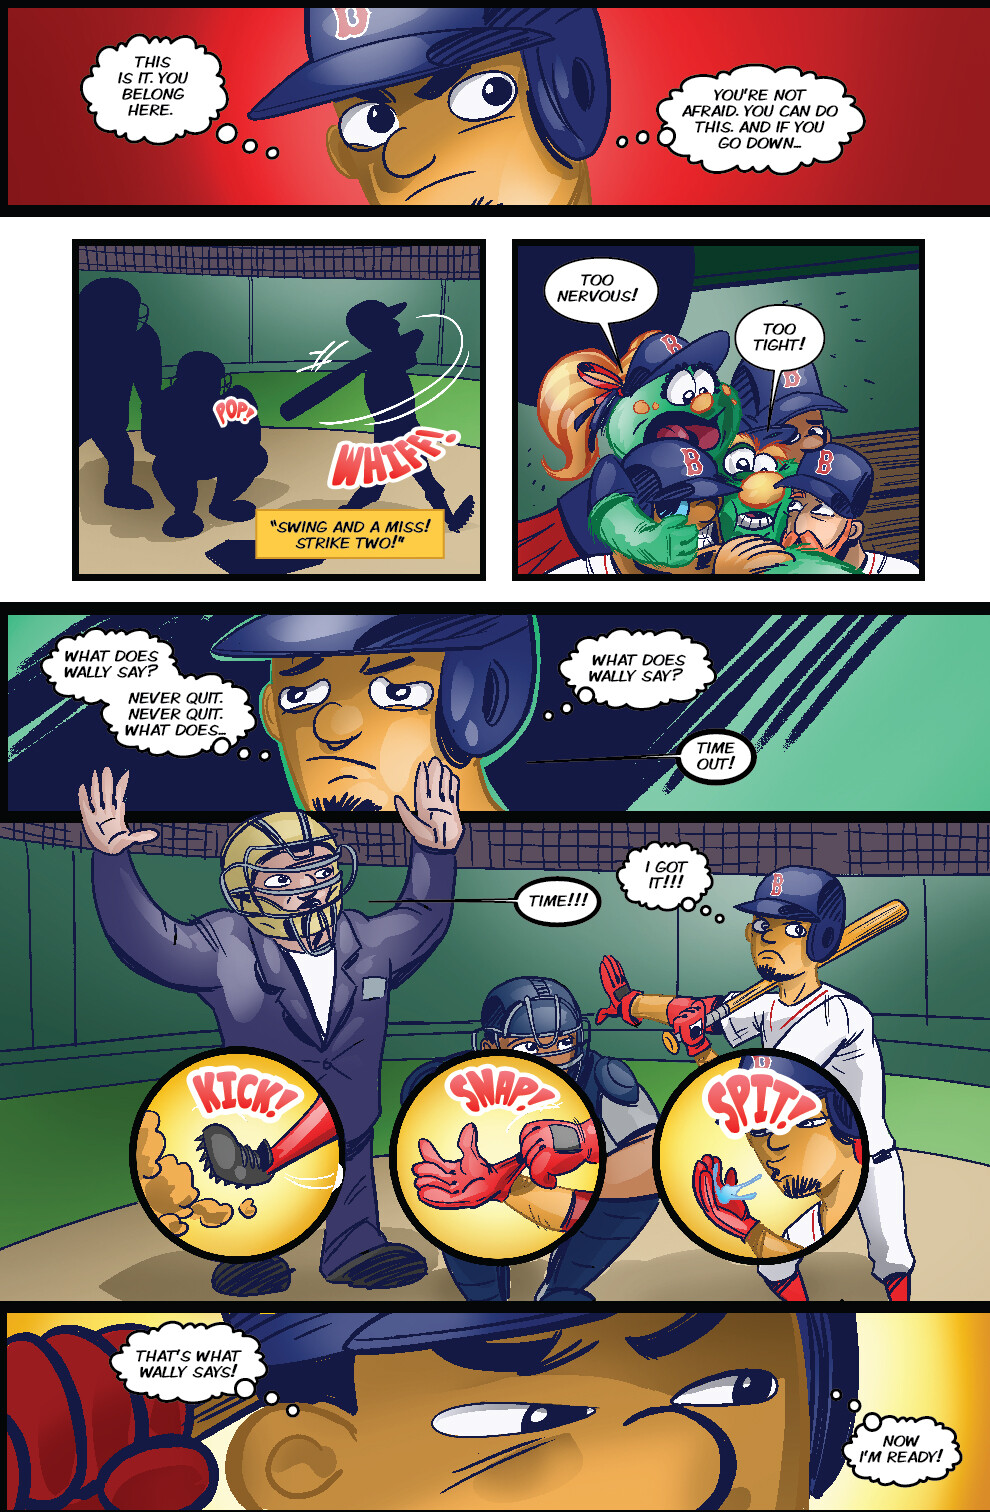 Sample Page 1 - Wally's Opening Day